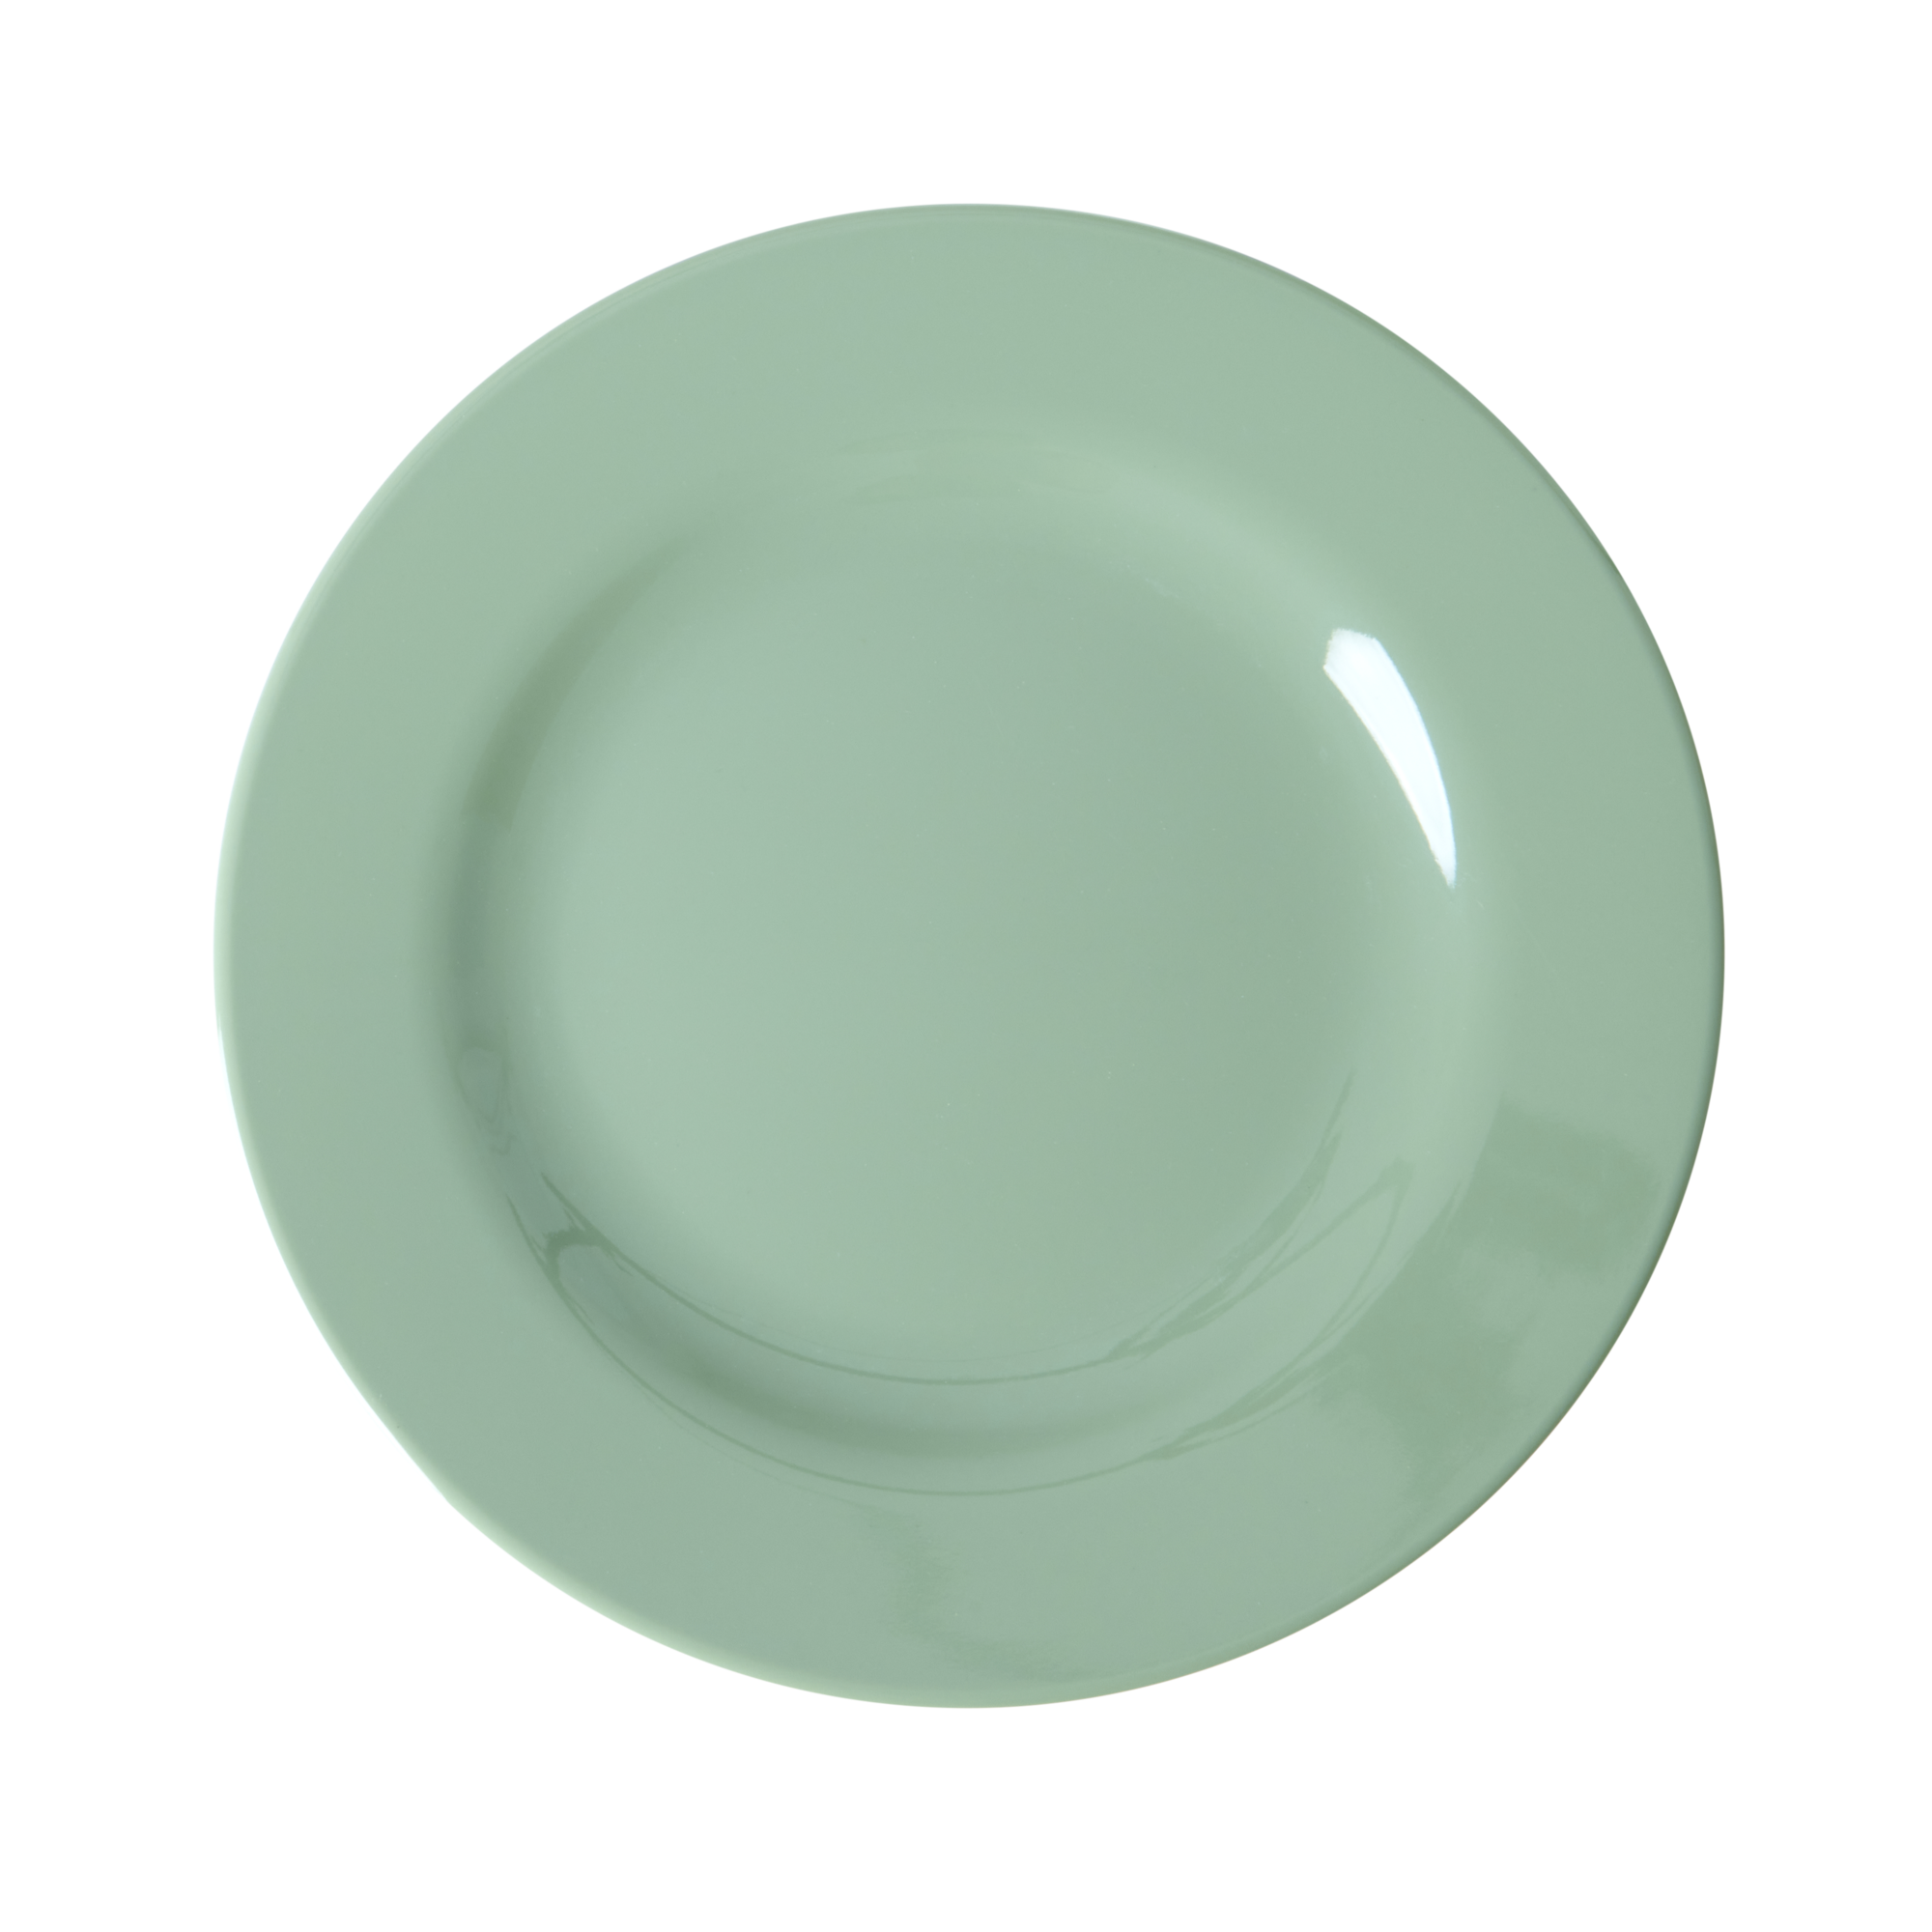 Melamine side plate by Rice by Rice in the color mint